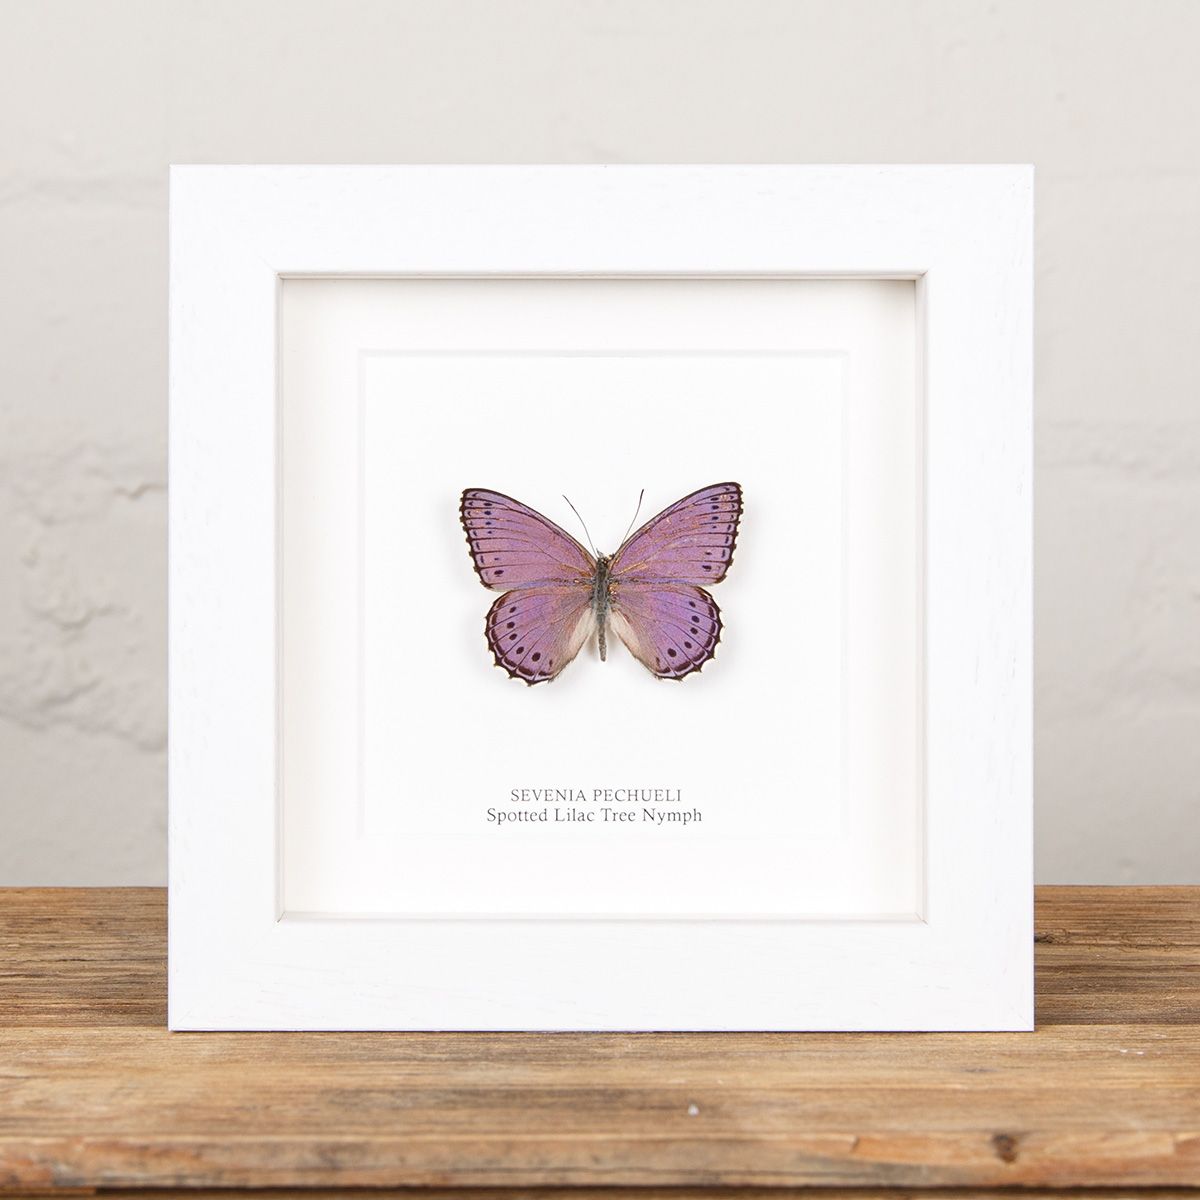 Spotted Lilac Tree Nymph Butterfly in Box Frame (Sevenia pechueli)